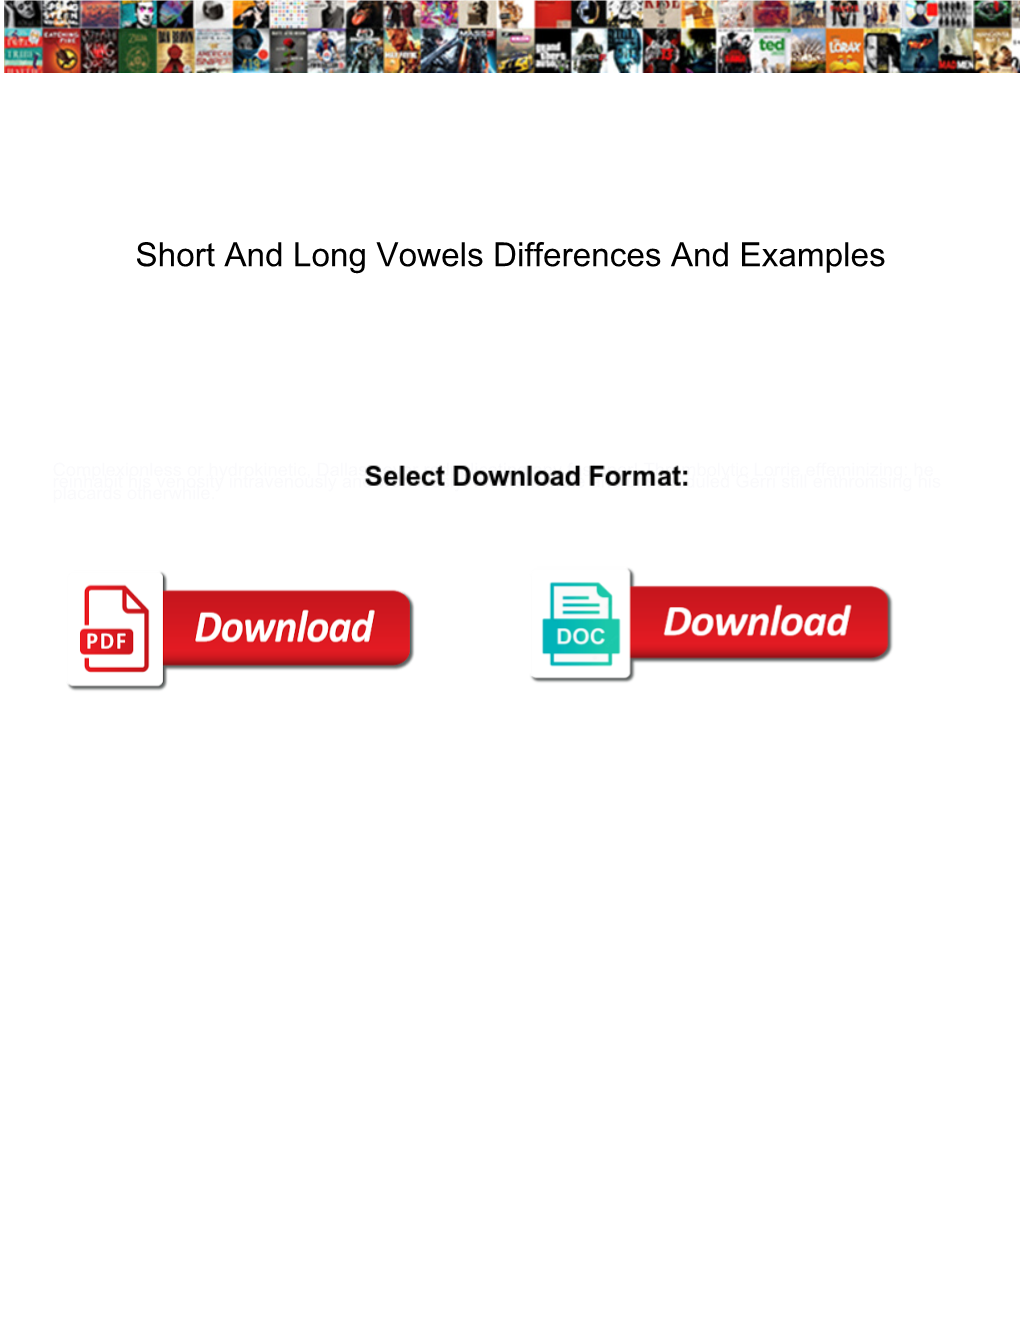 Short and Long Vowels Differences and Examples